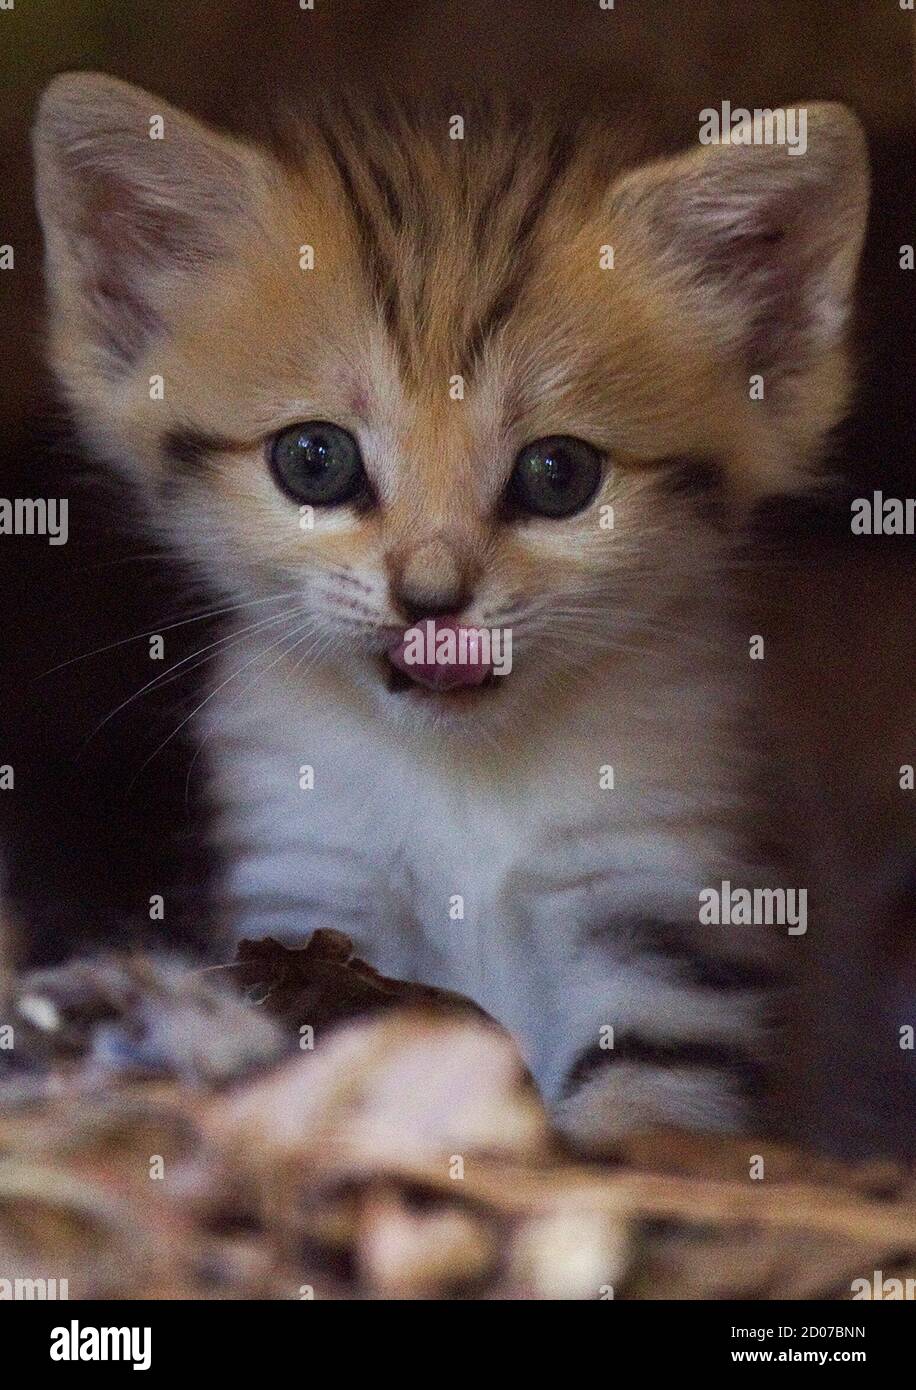 Renana, a 3-week-old sand kitten, is seen at her enclosure in the Ramat Gan Safari near Tel Aviv August 8, 2011. The kitten is the first of the sand cat species, considered extinct in Israel, to be born at the safari park, an open-air zoo, a statement from the safari said. REUTERS/Nir Elias (ISRAEL - Tags: ANIMALS ENVIRONMENT IMAGES OF THE DAY) Stock Photo